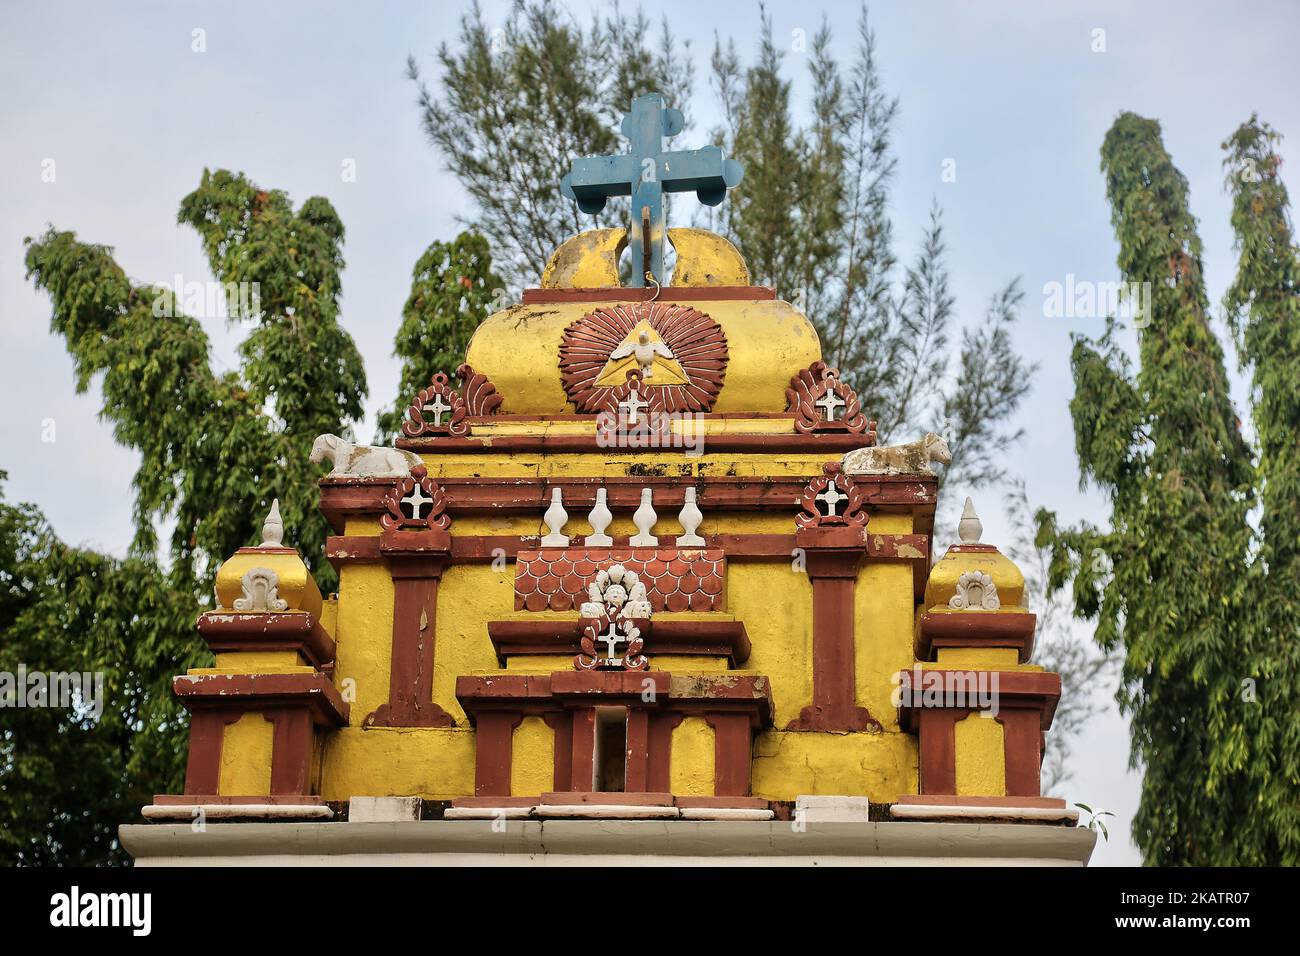 The Karuna Nilayam Church of Ceylon in Killinochchi, Sri Lanka. The unique style of design of the Karuna Nilayam Catholic Church mimics the traditional architectural style commonly seen in Hindu temples throughout Sri Lanka and South India. (Photo by Creative Touch Imaging Ltd./NurPhoto) Stock Photo